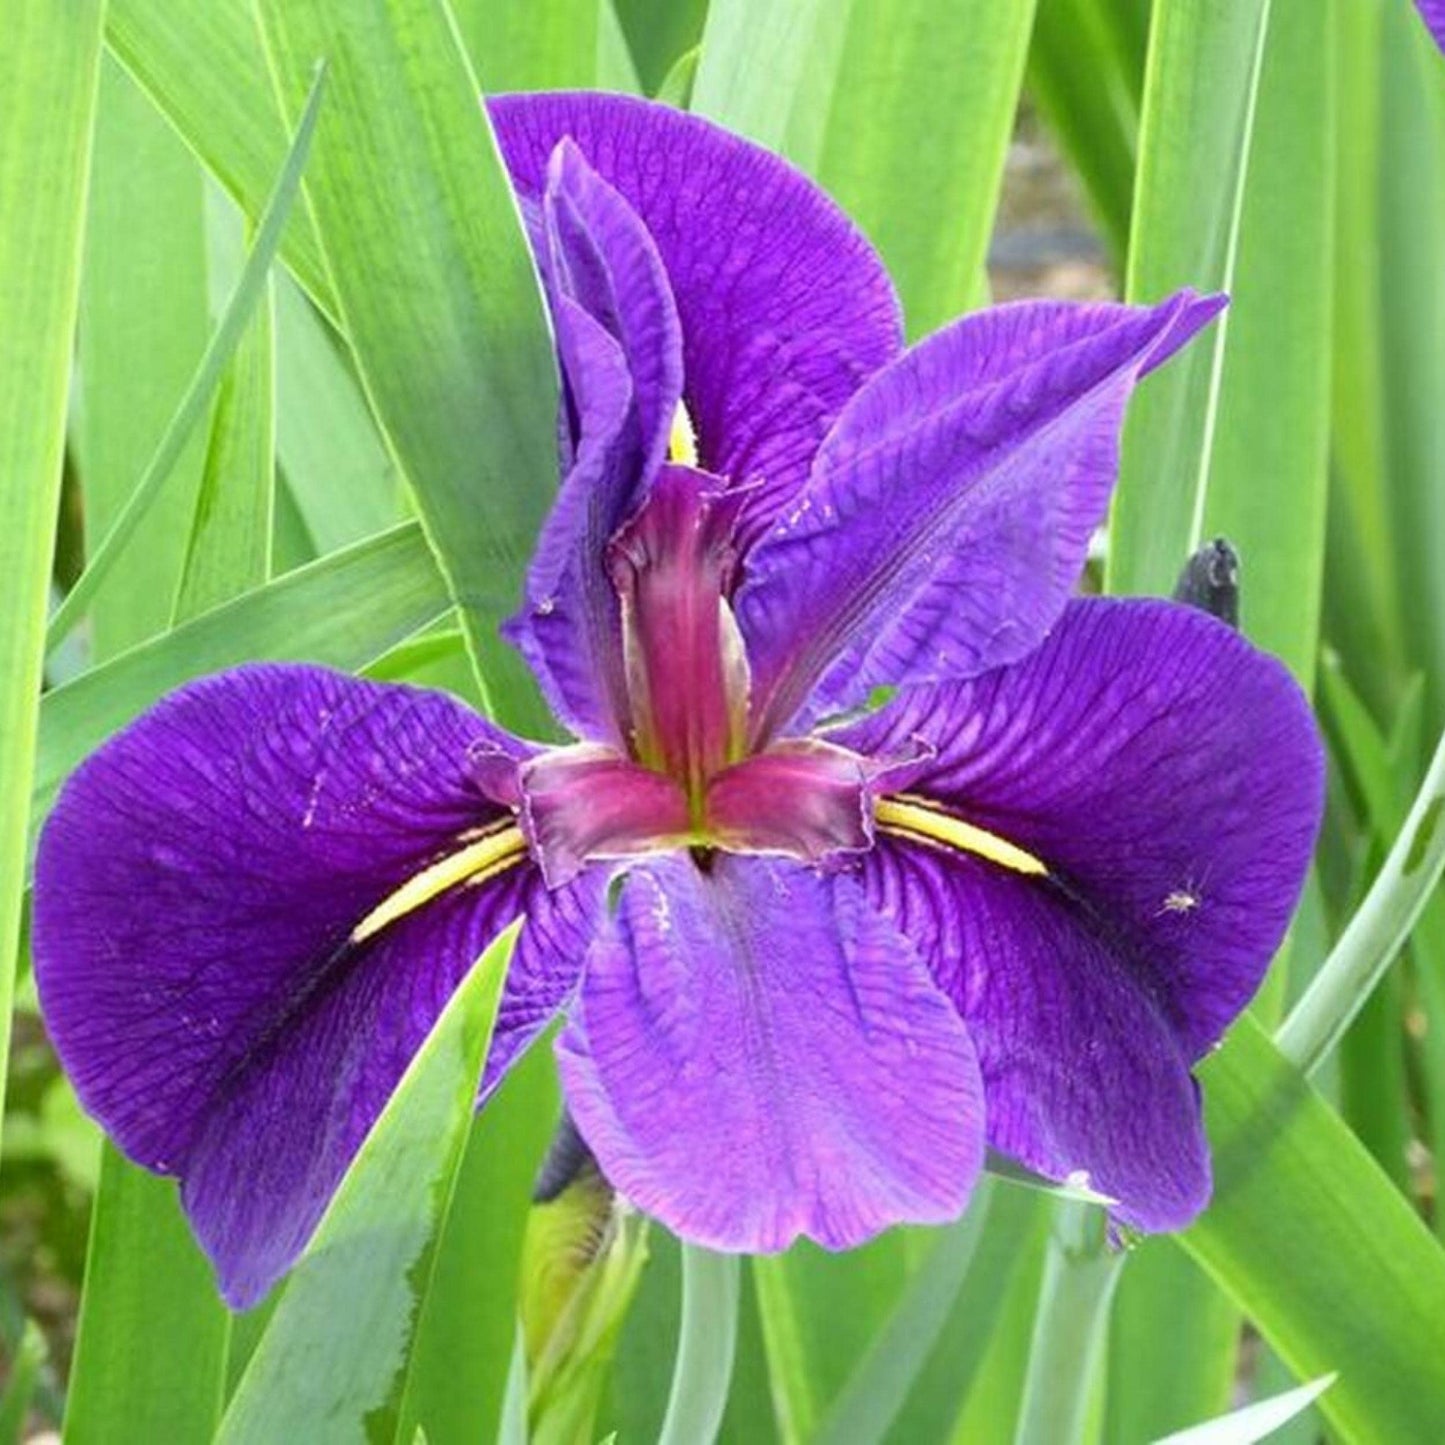 Iris 'Black Gamecock', a Great Live Pond Plant for Your Water Garden. Filters The koi and Goldfish Pond. Good for Bogs, Plant Shelf or Shallow Water This marginal Aquatic is a Real Beauty